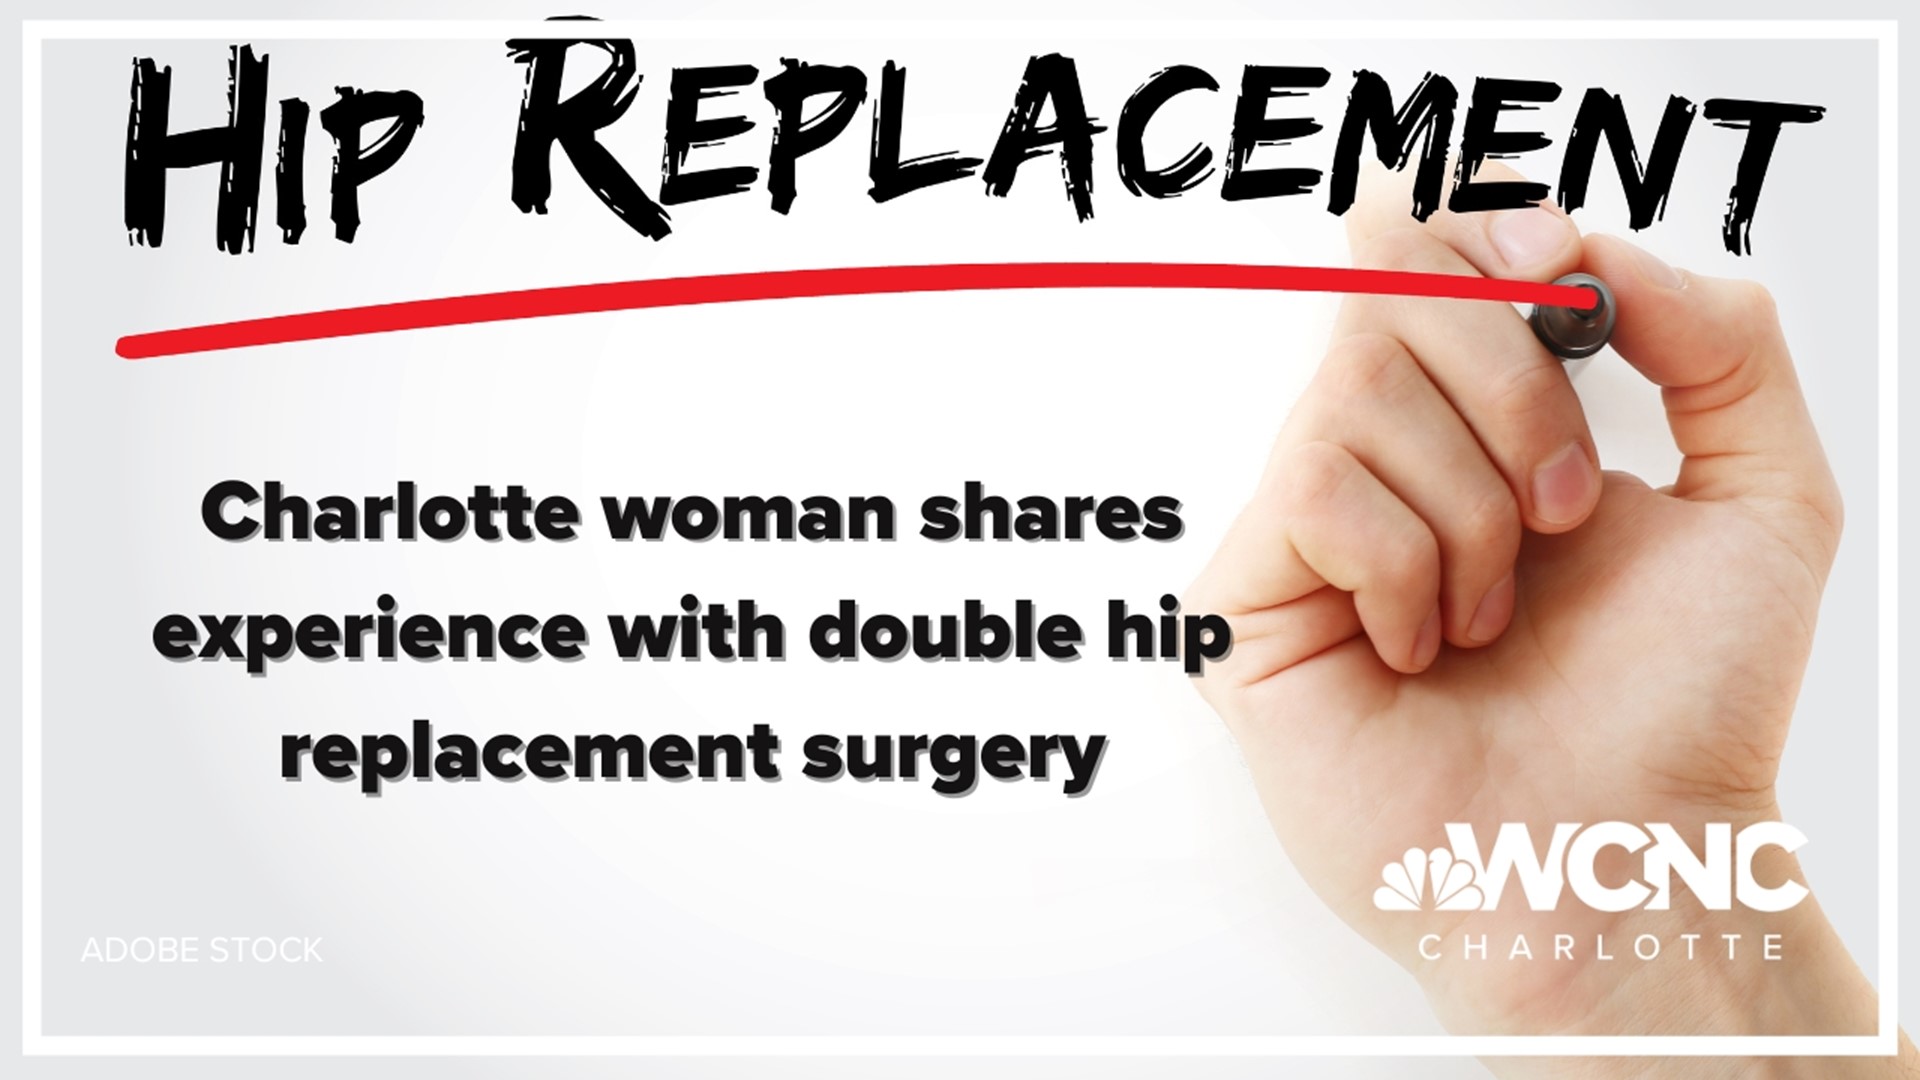 Hip replacement surgery has been around for decades and the advancements in techniques are making it possible to recover quicker.